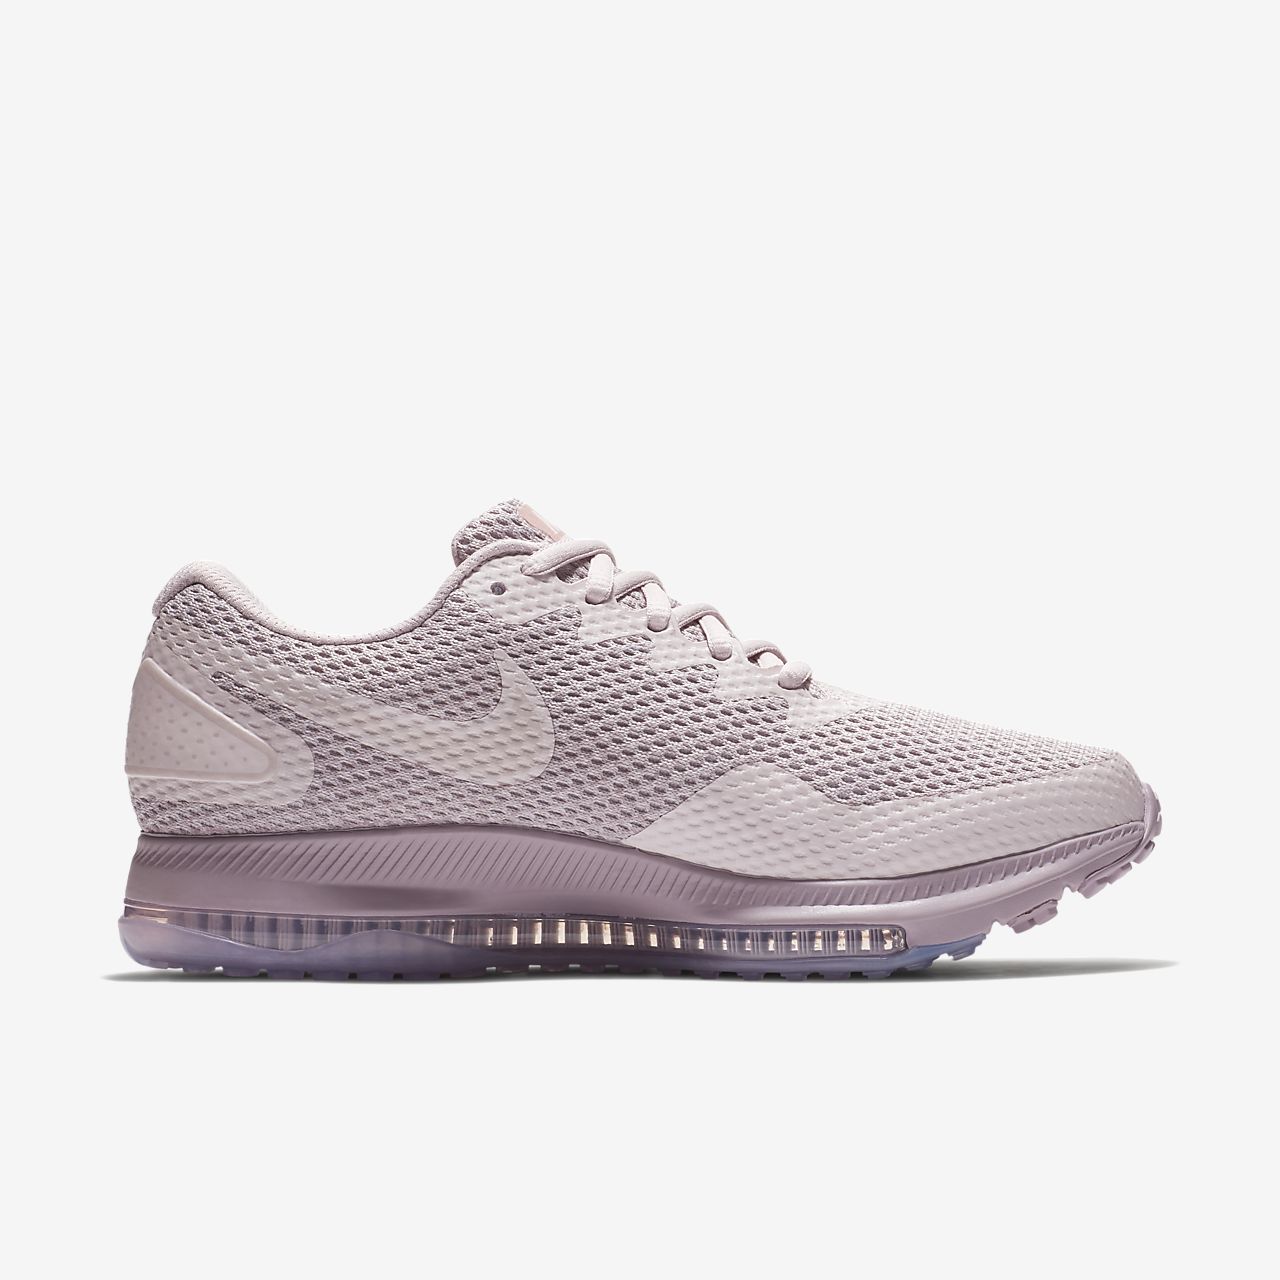 nike zoom all out low 2 women's50% OFF 